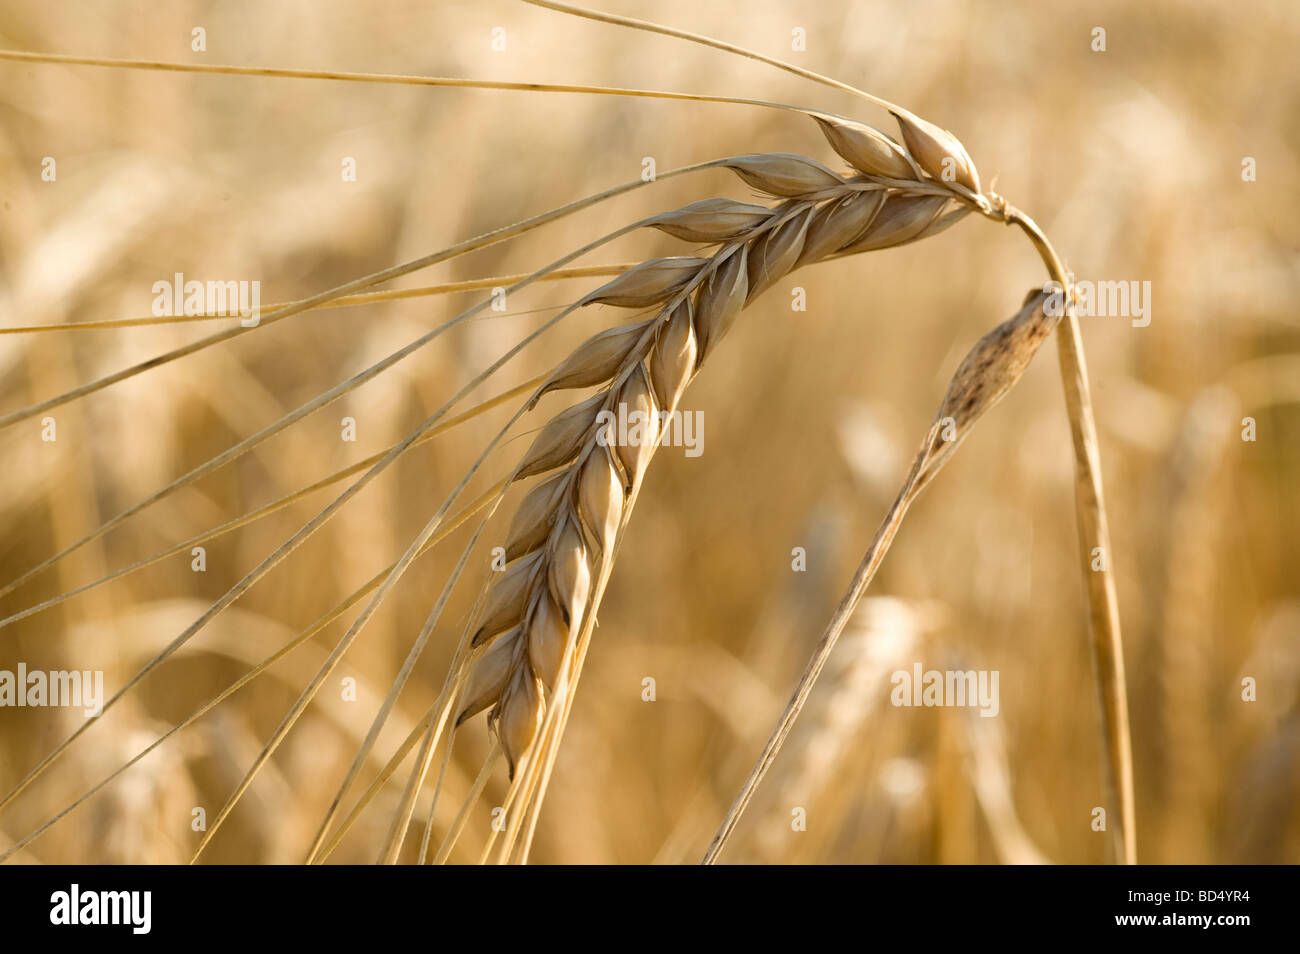 Rye (Secale cereale) common food world wide, Sweden Stock Photo